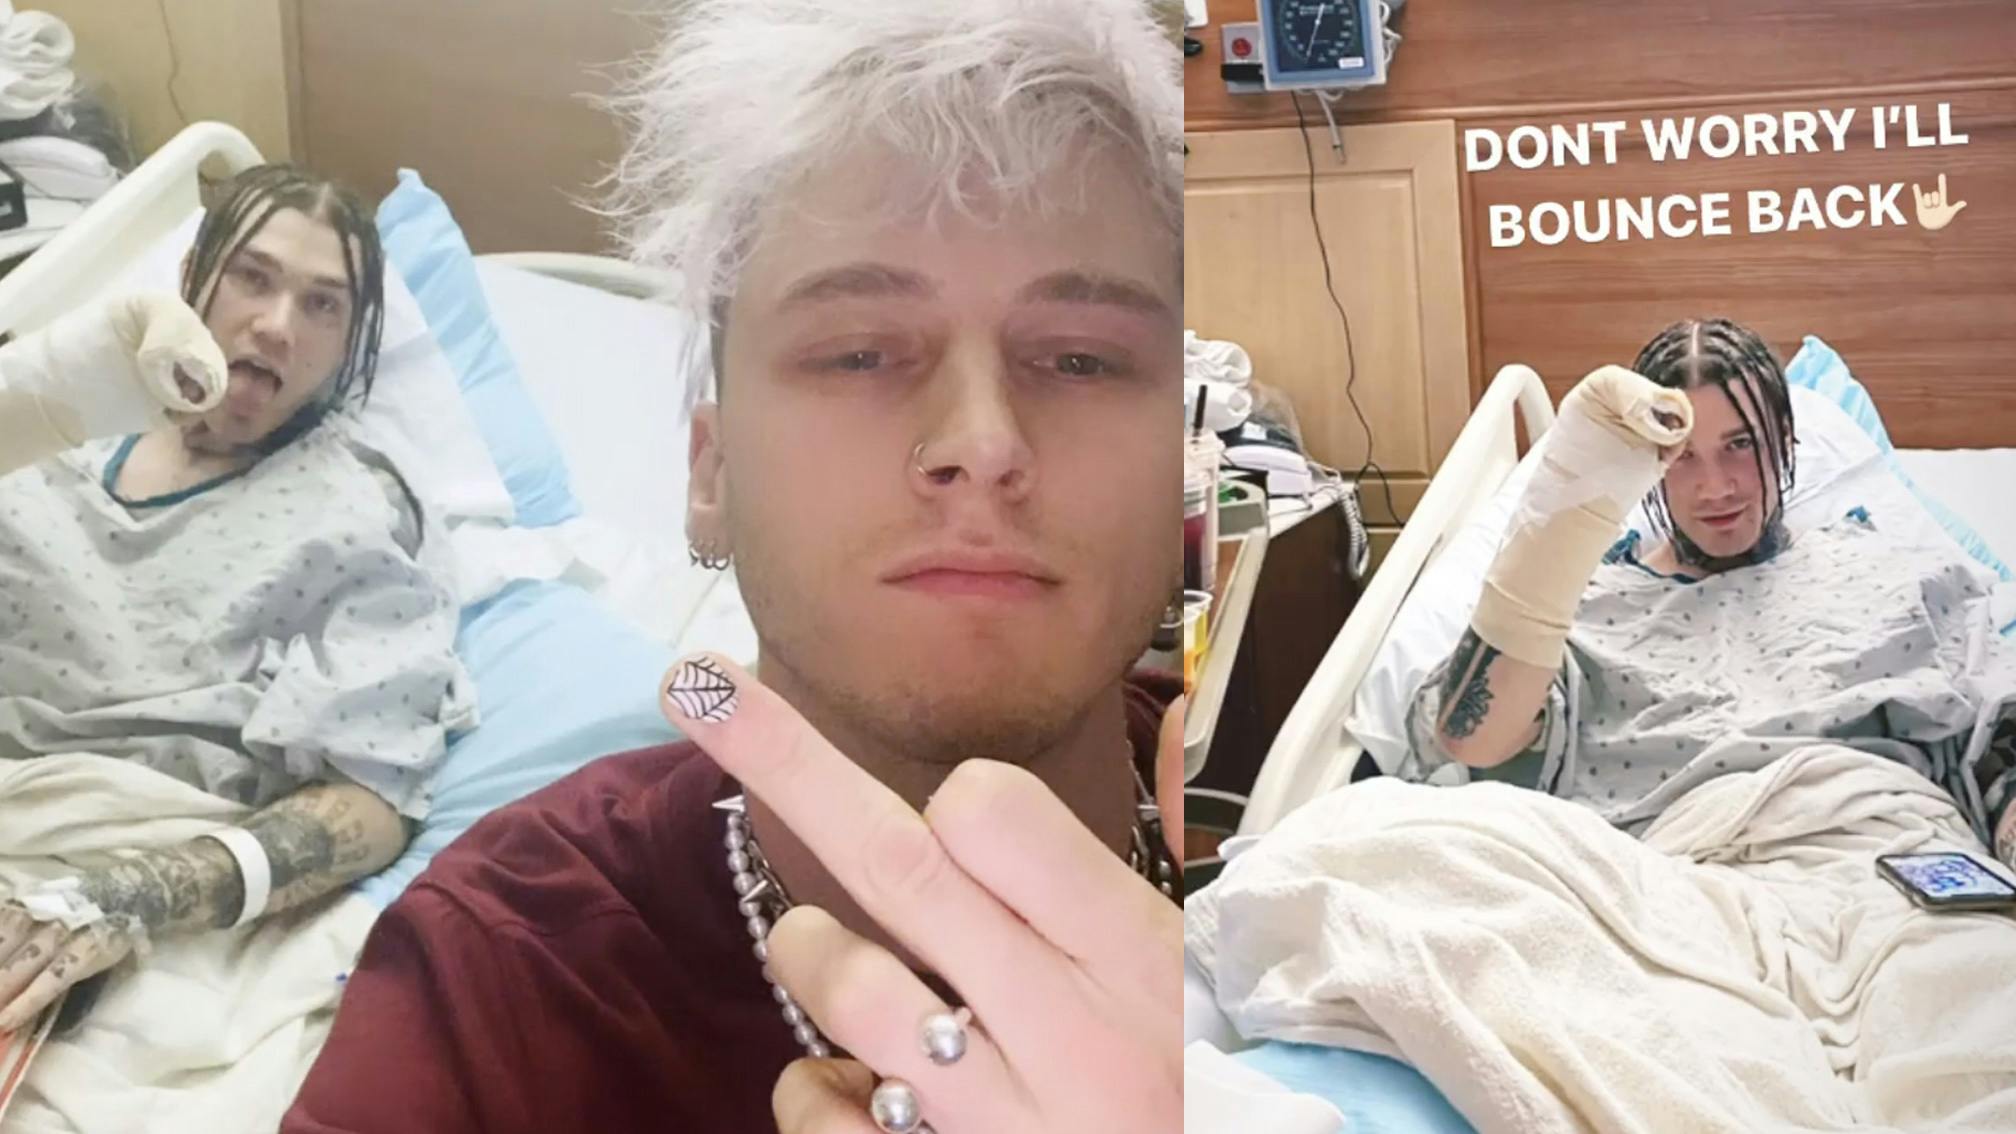 Machine Gun Kelly drummer Rook hospitalised after being "robbed, assaulted and hit by a car"